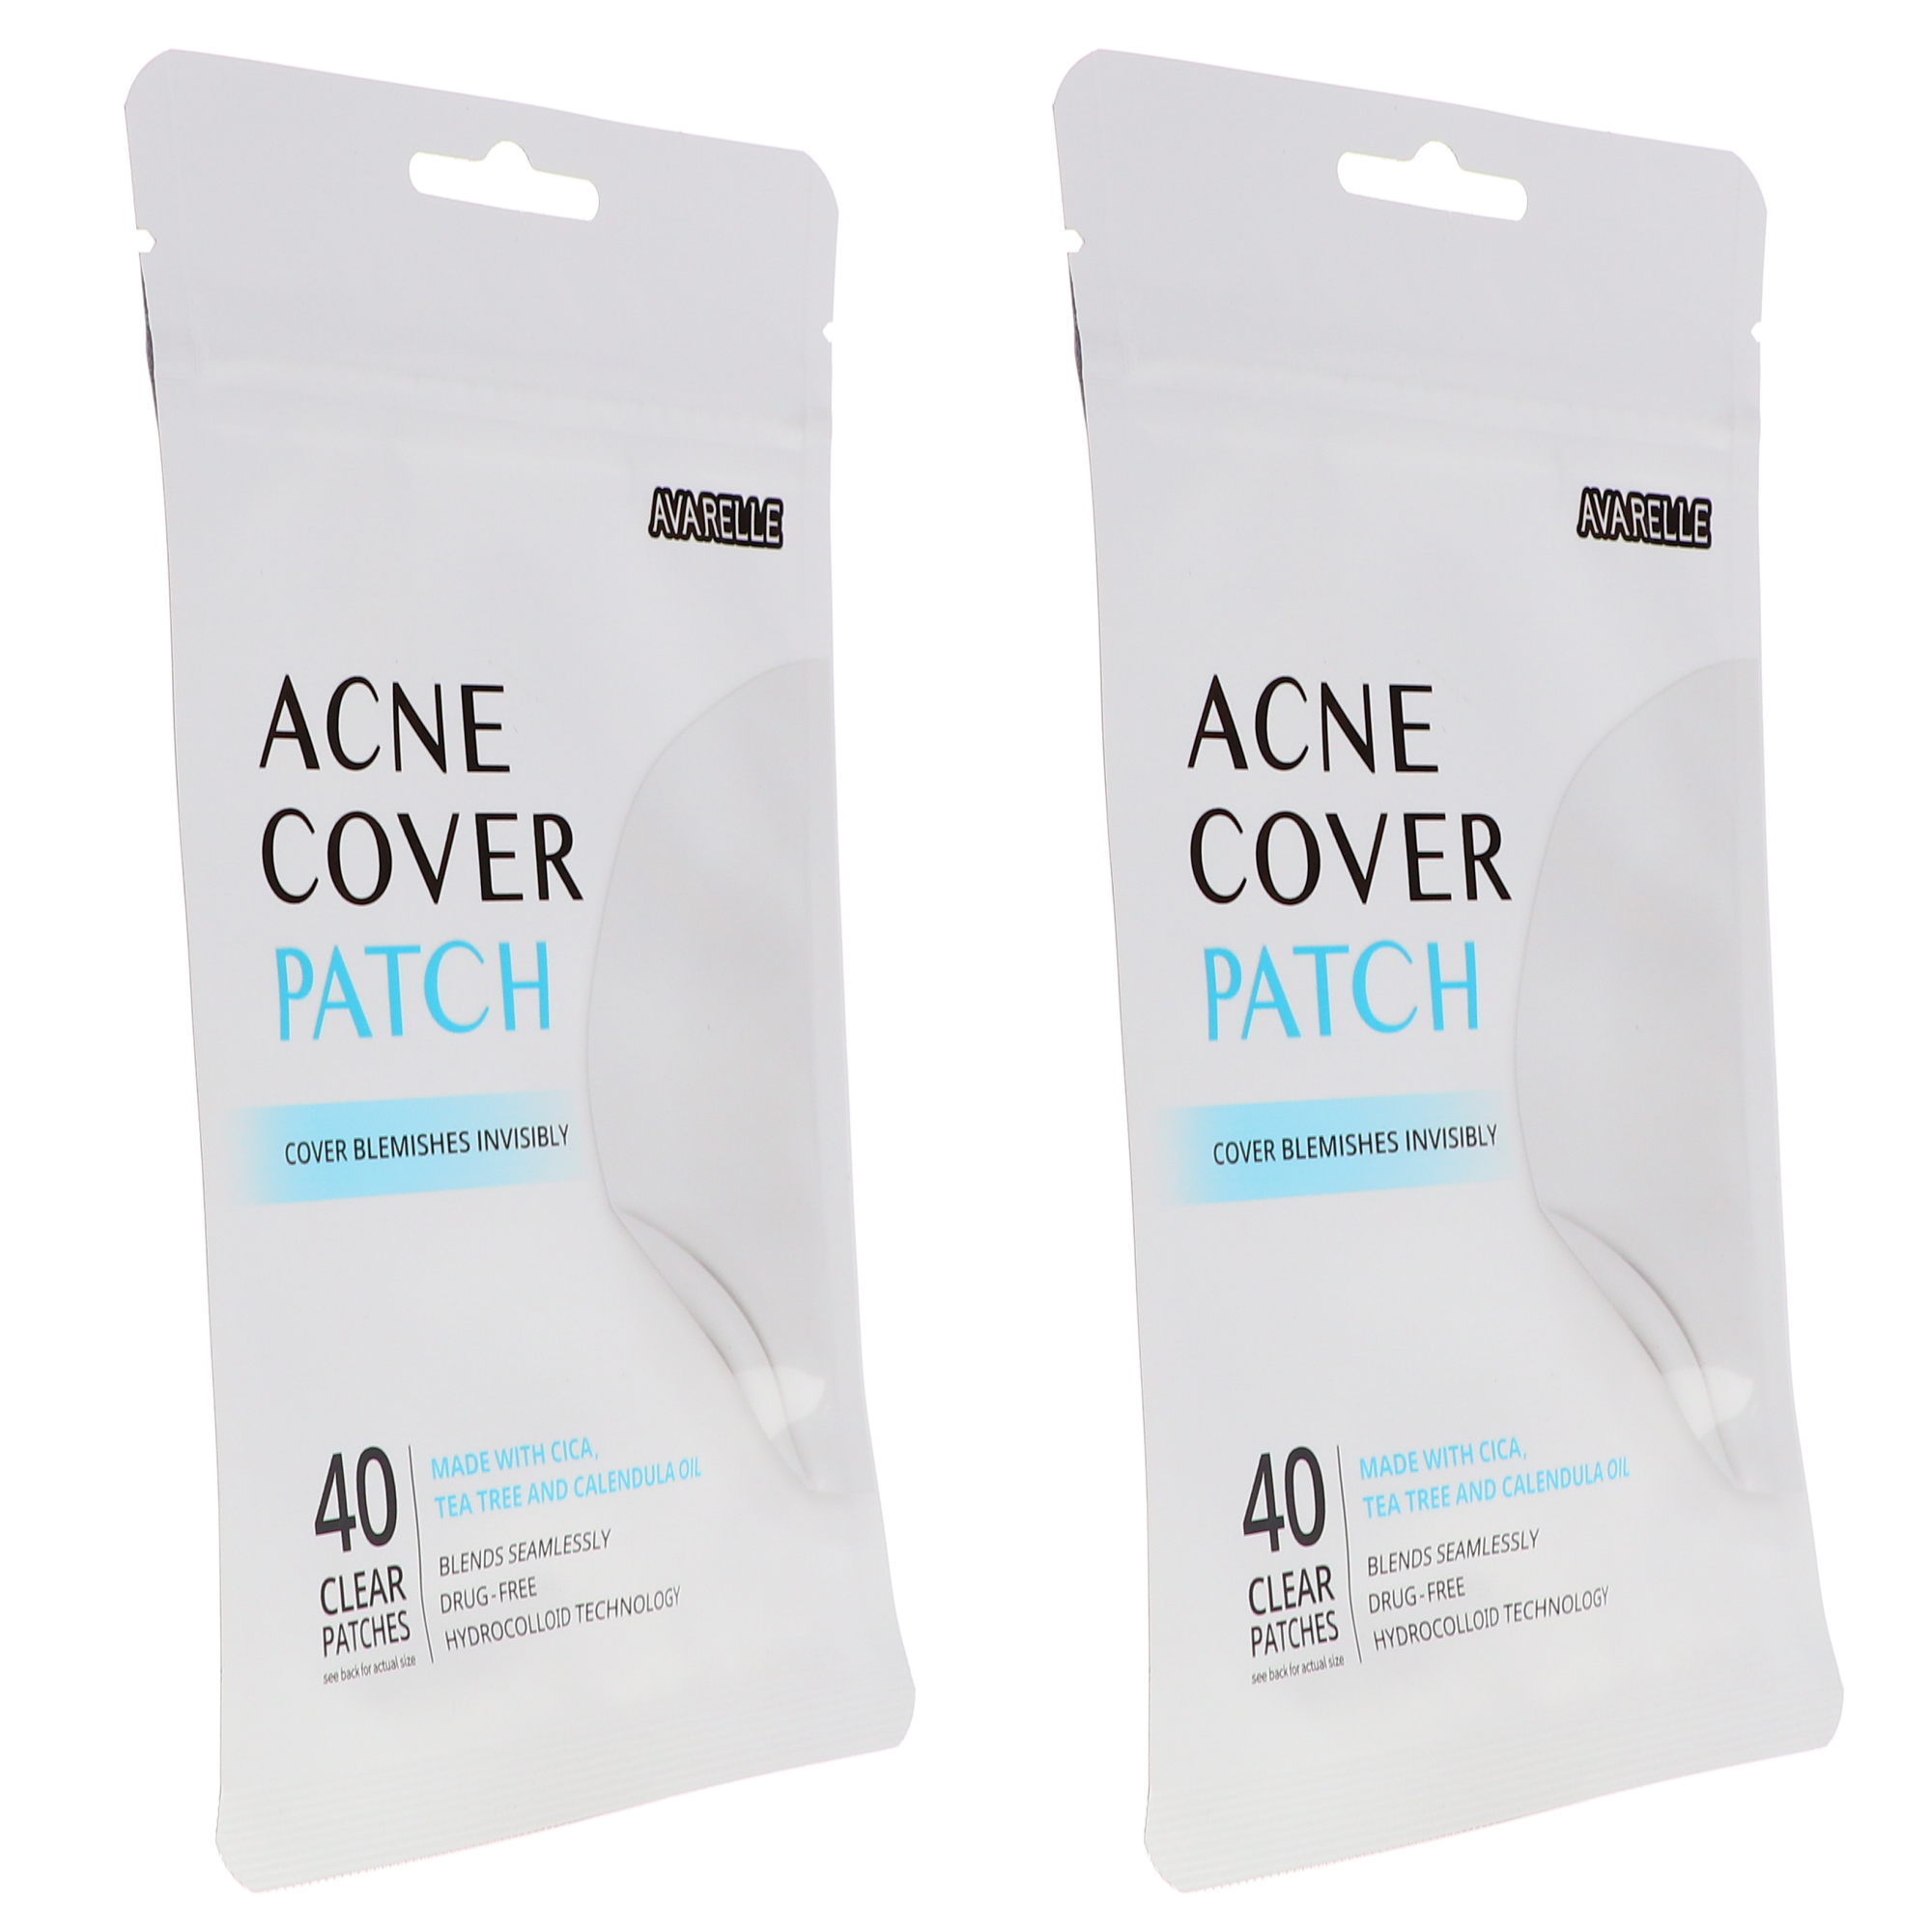 Avarelle Acne Cover Patch 40 ct 2 Pack LaLa Daisy